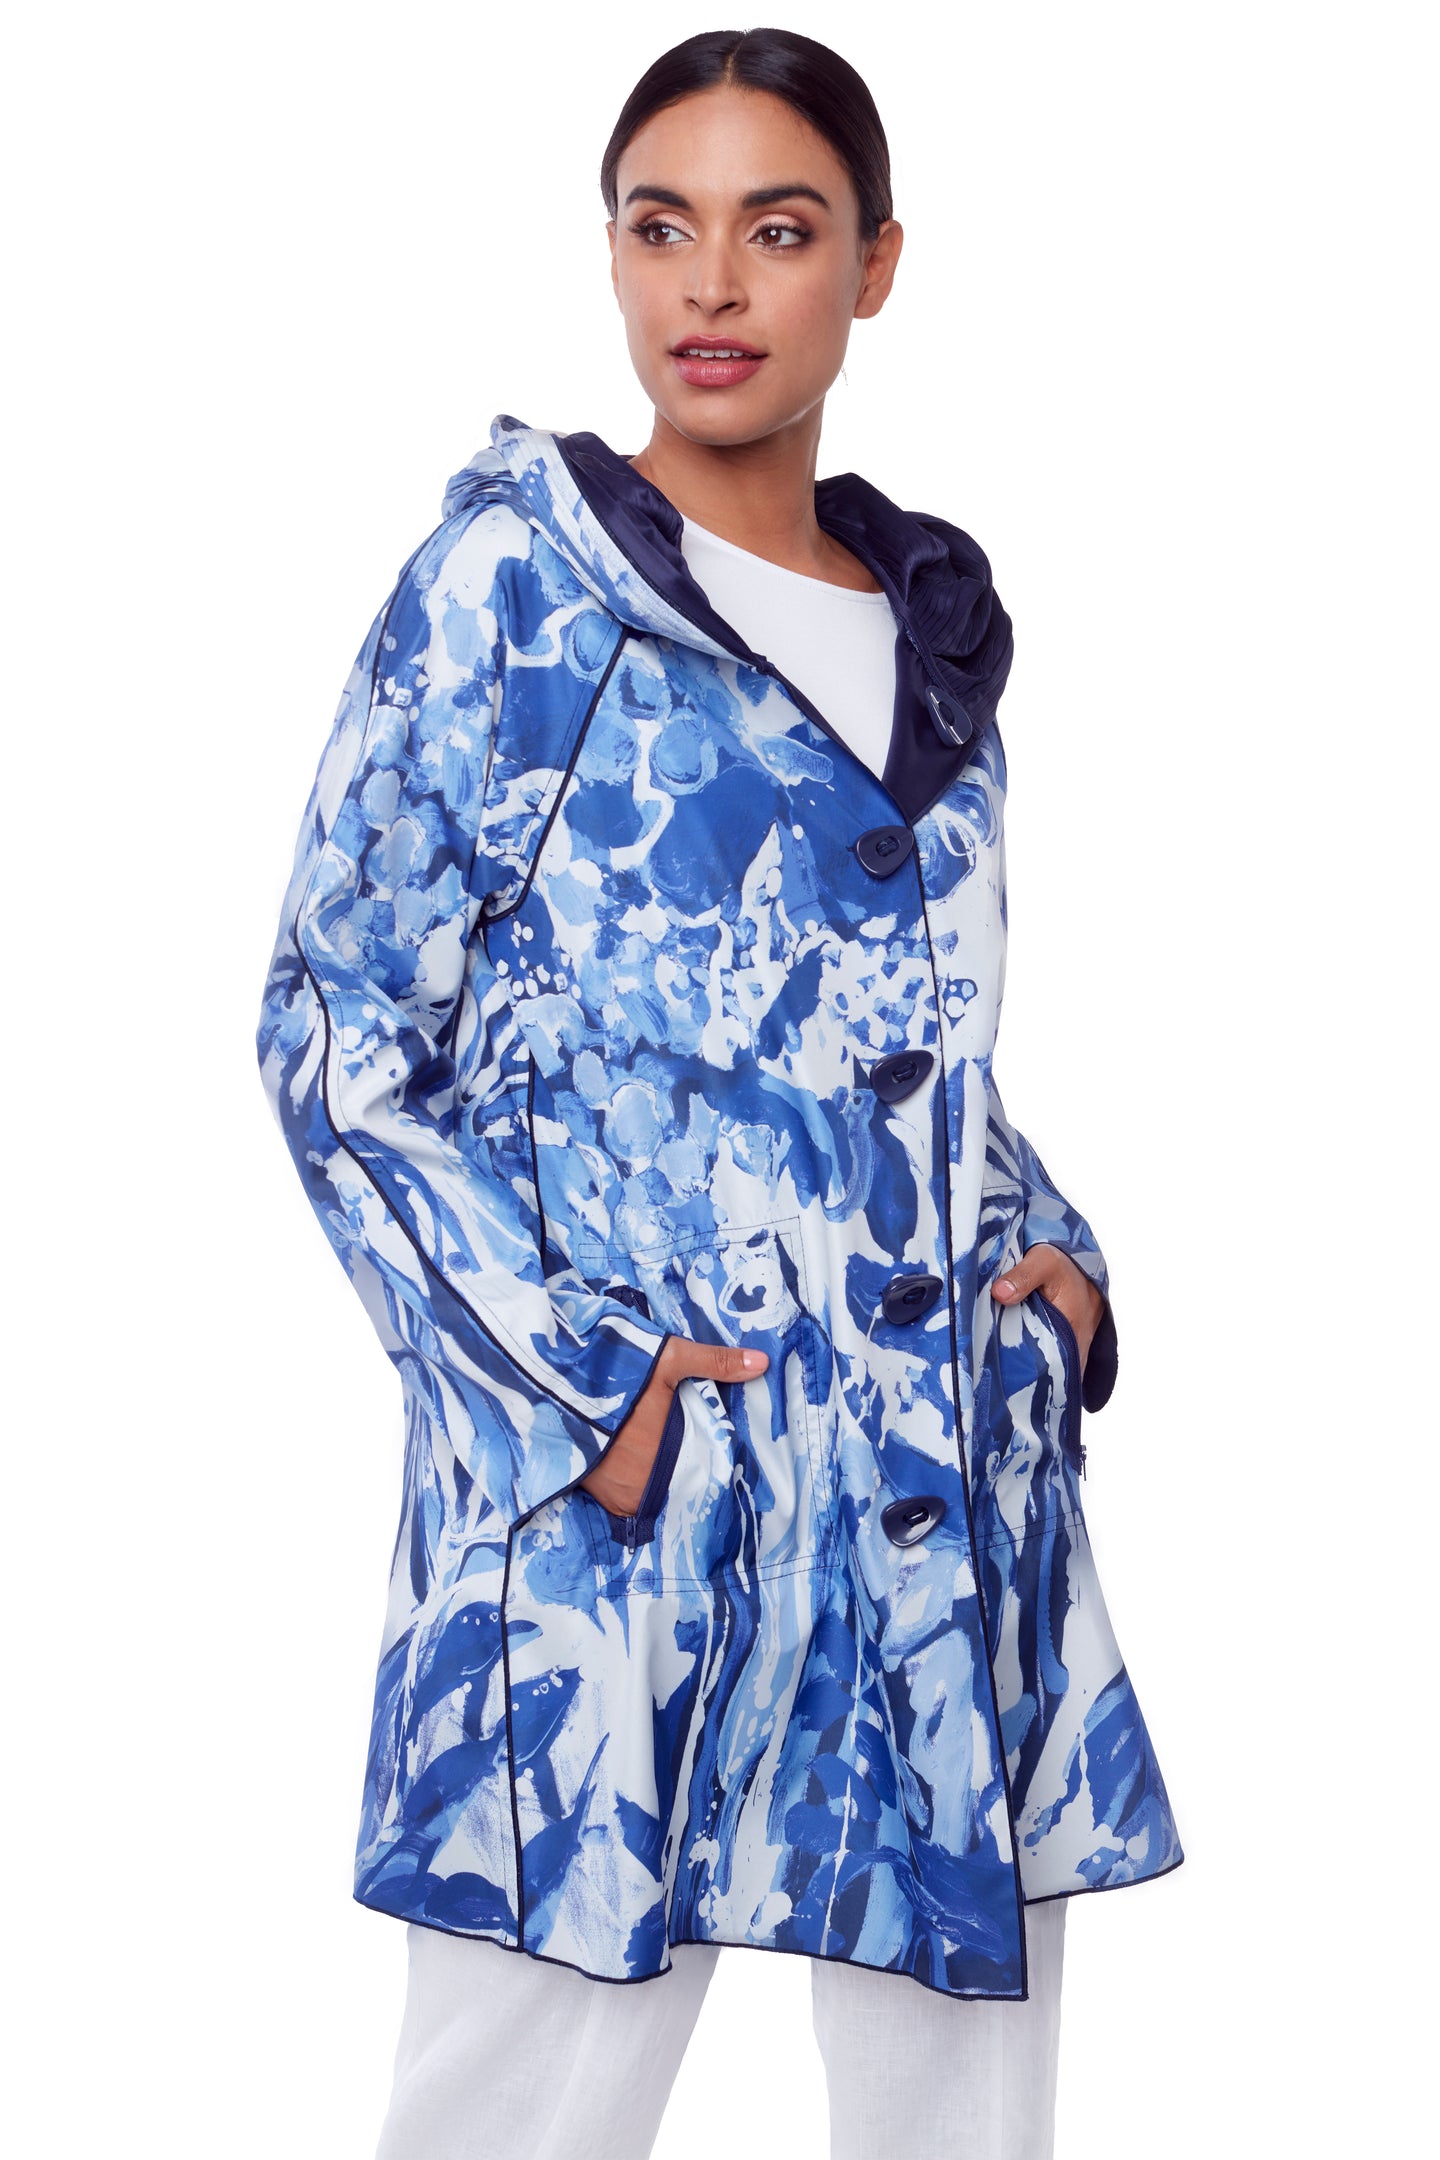 Blue & White: At Liberty in the Garden reversible coat